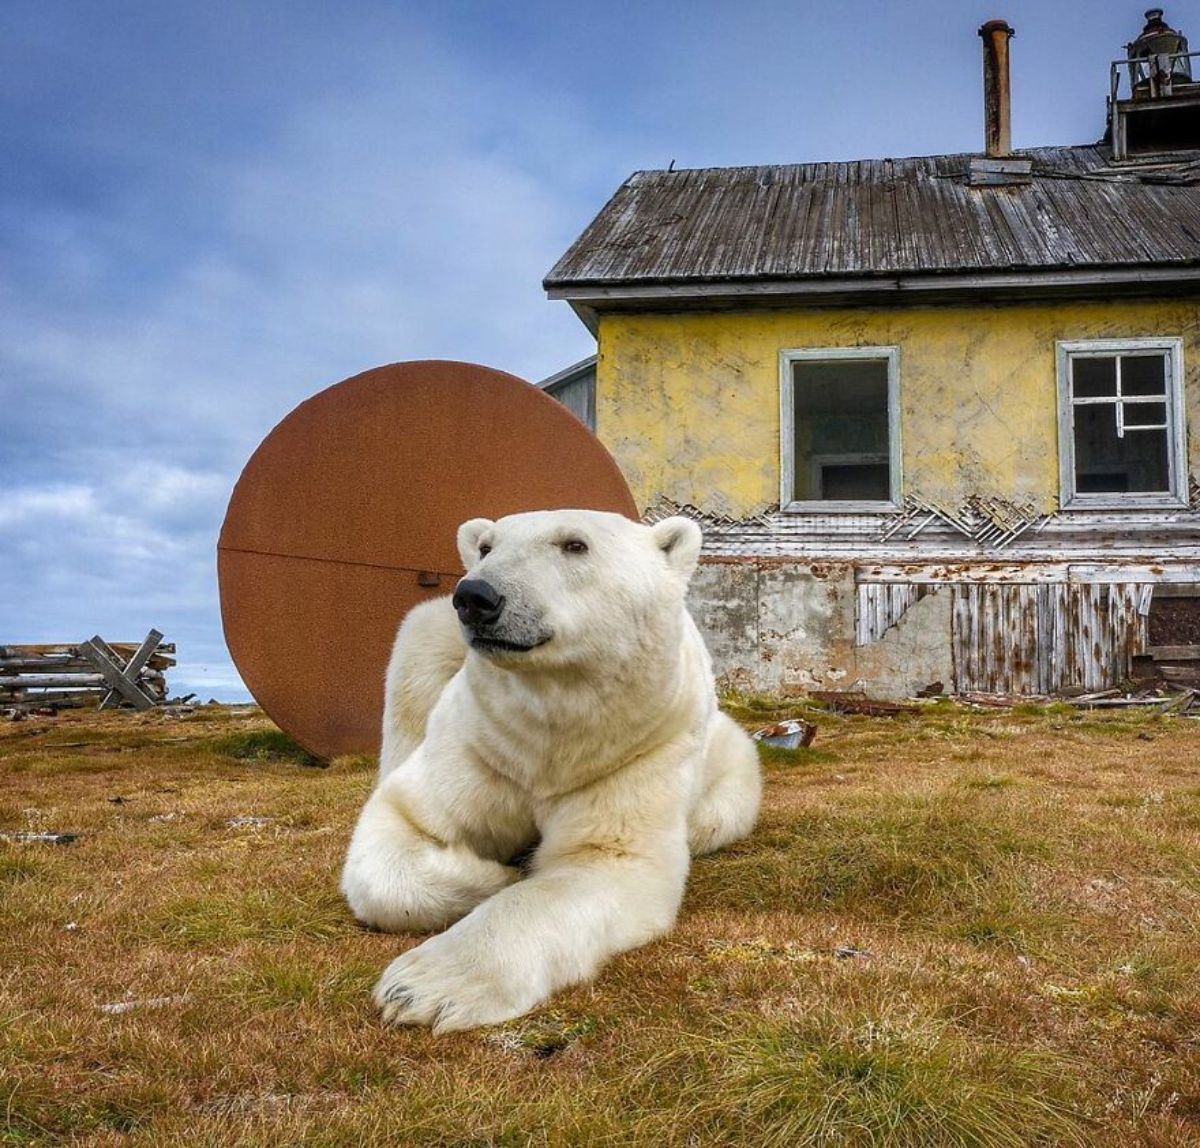 polar bear laying on grass in front of a brown barrel and a yellow house